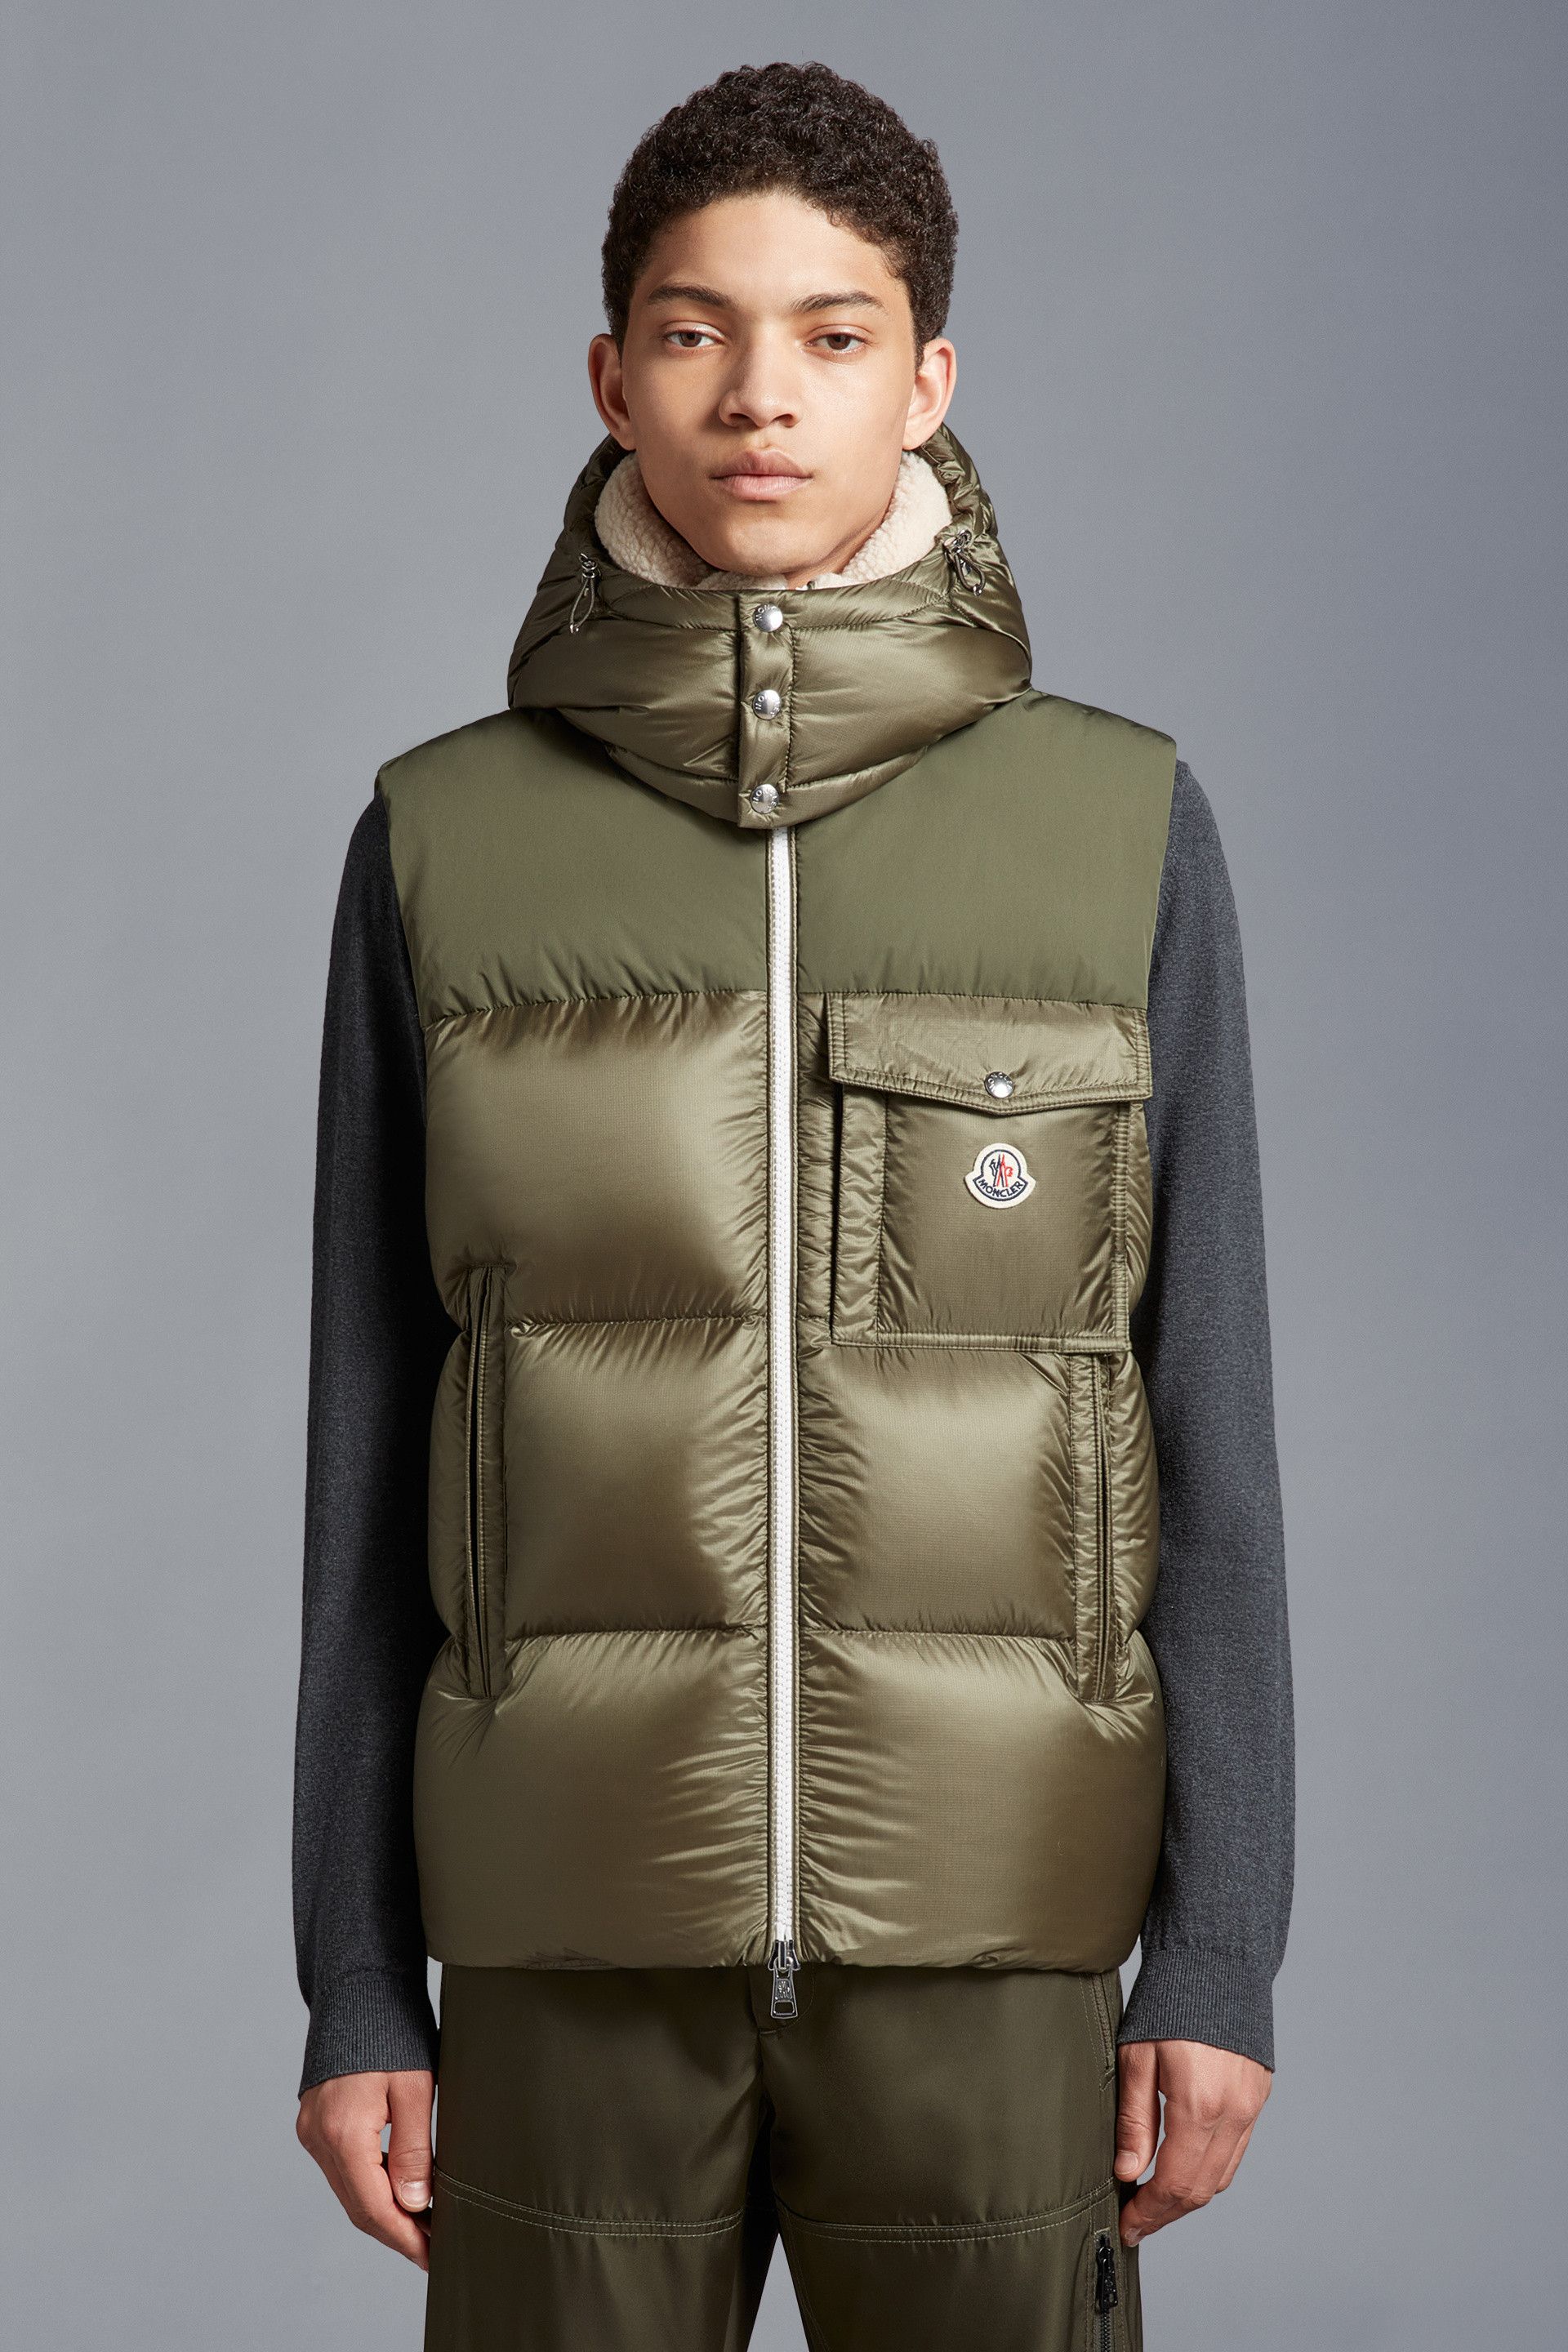 Moncler Japan Online Shop — Clothing and Down Jackets